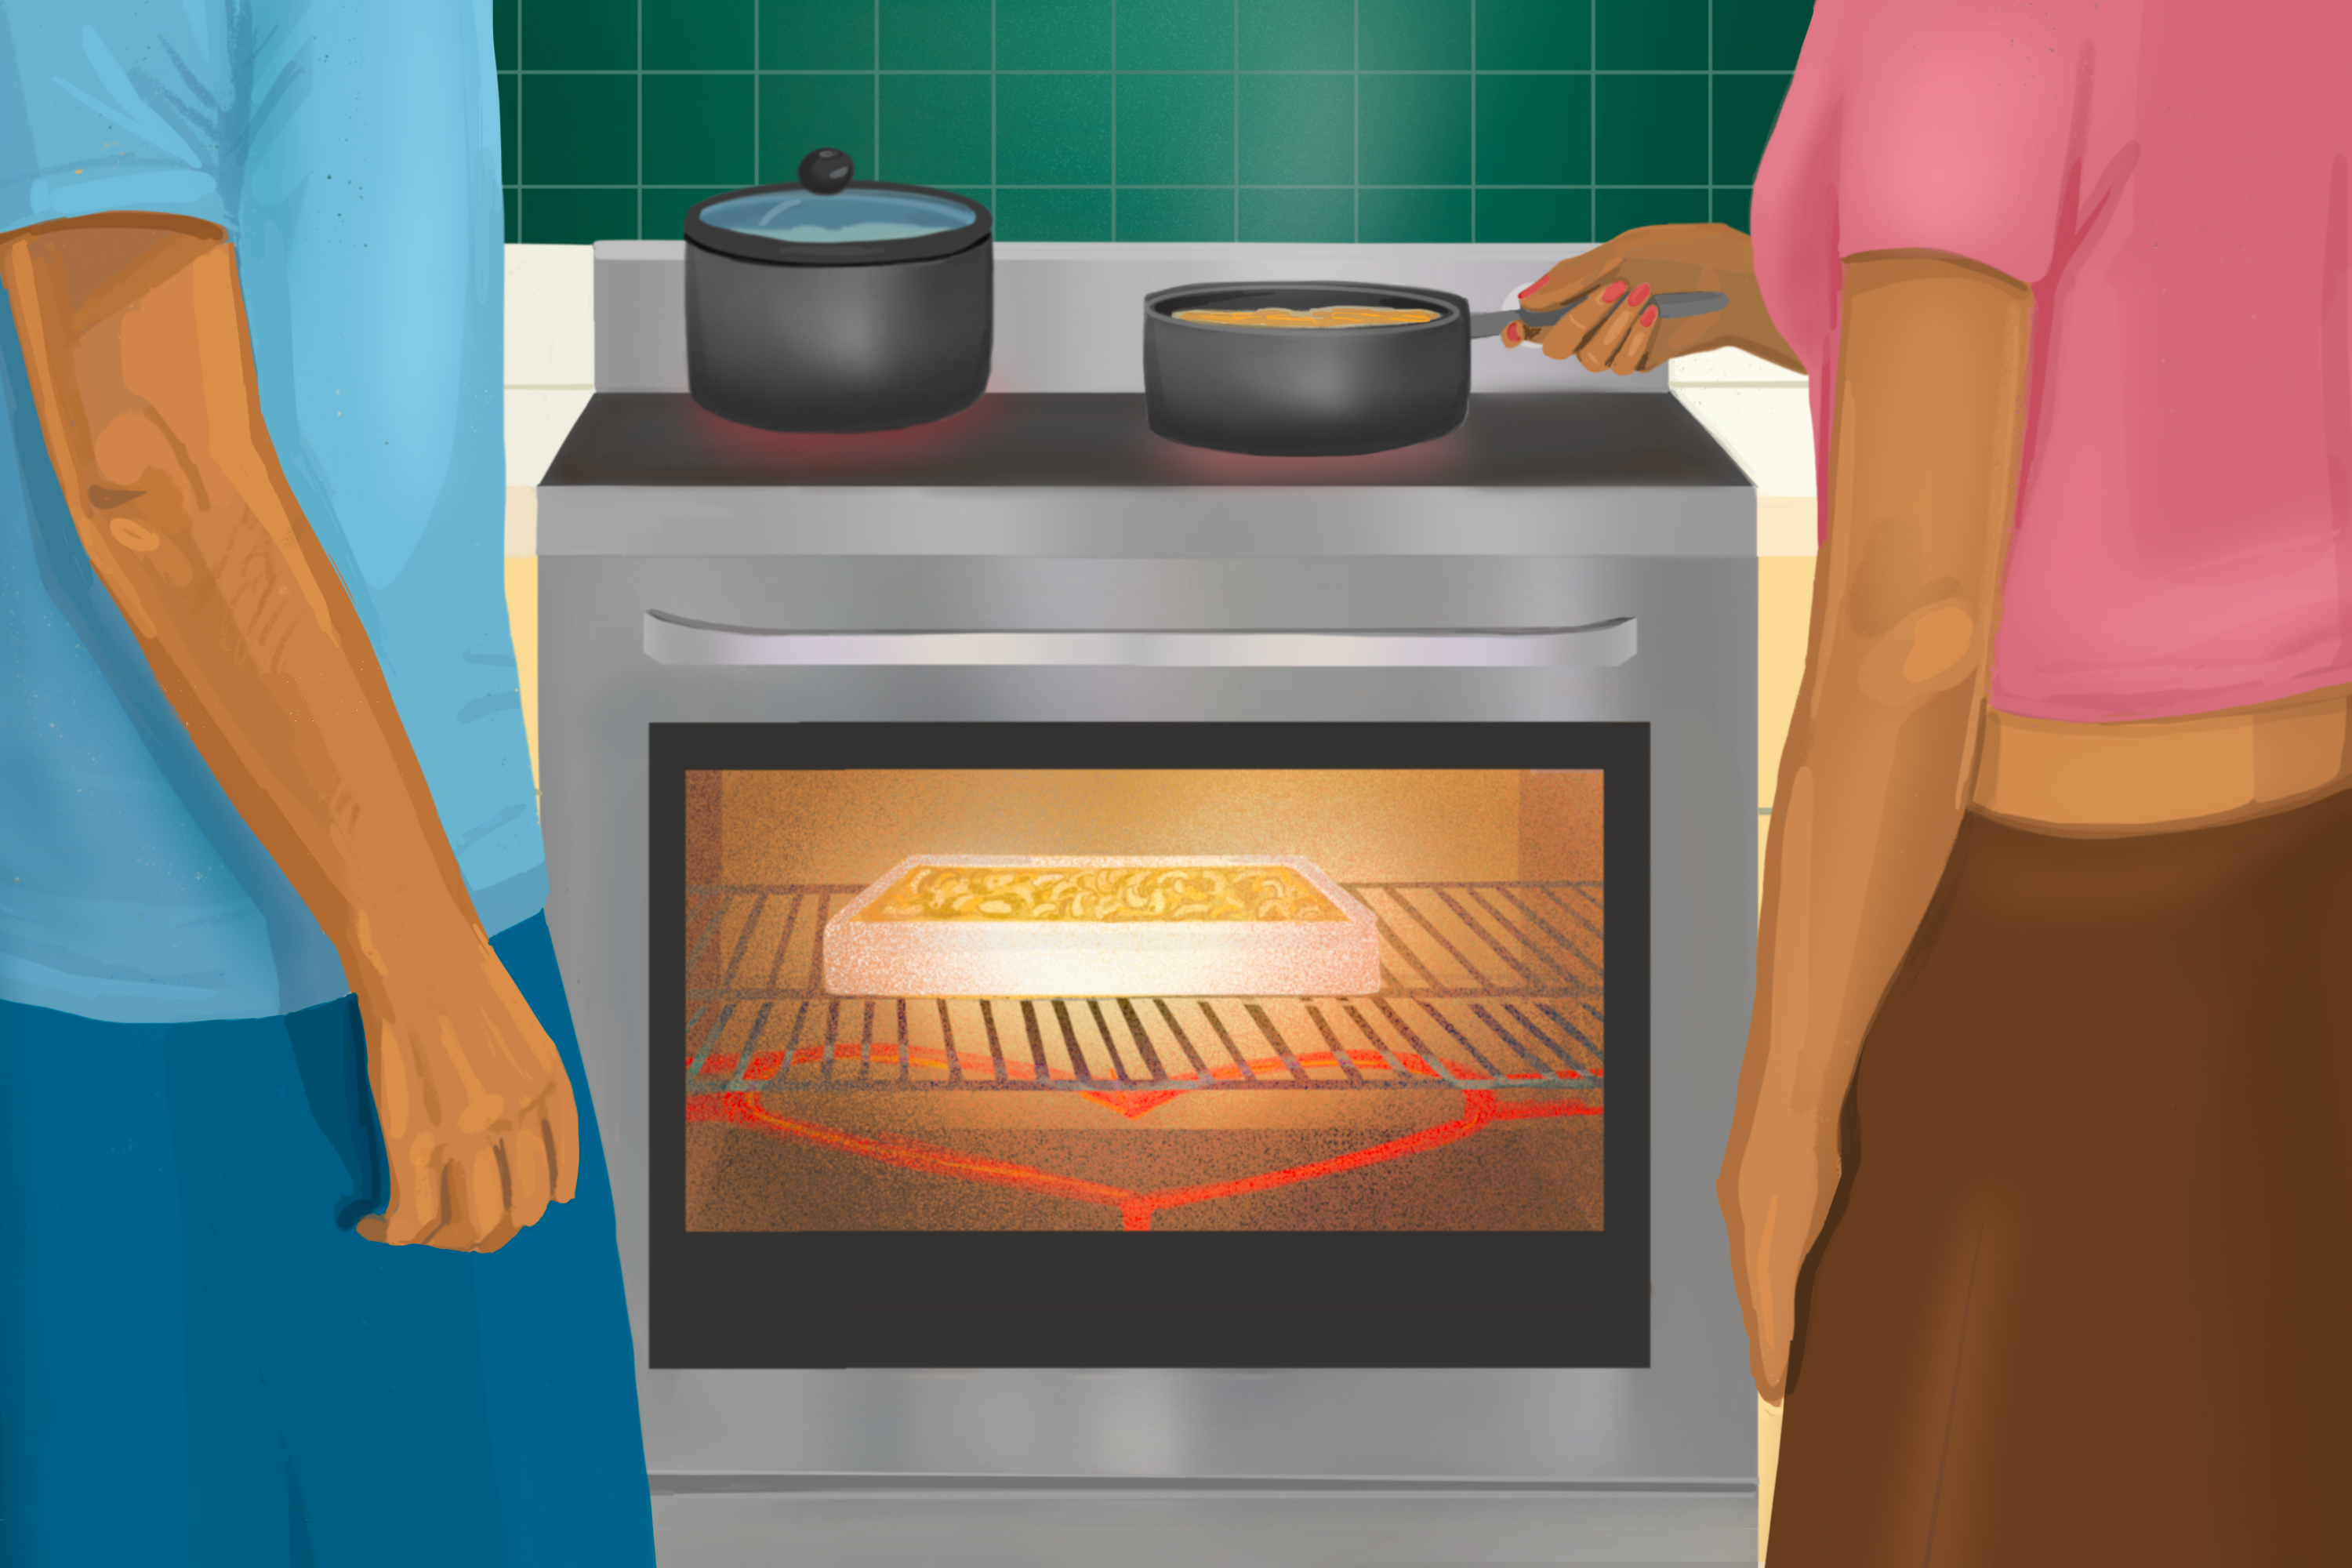 Two individuals stand near an oven, tending pots on the stove top. In the oven there is a casserole dish of macaroni and cheese baking above a heart-shaped coil. Illustration.